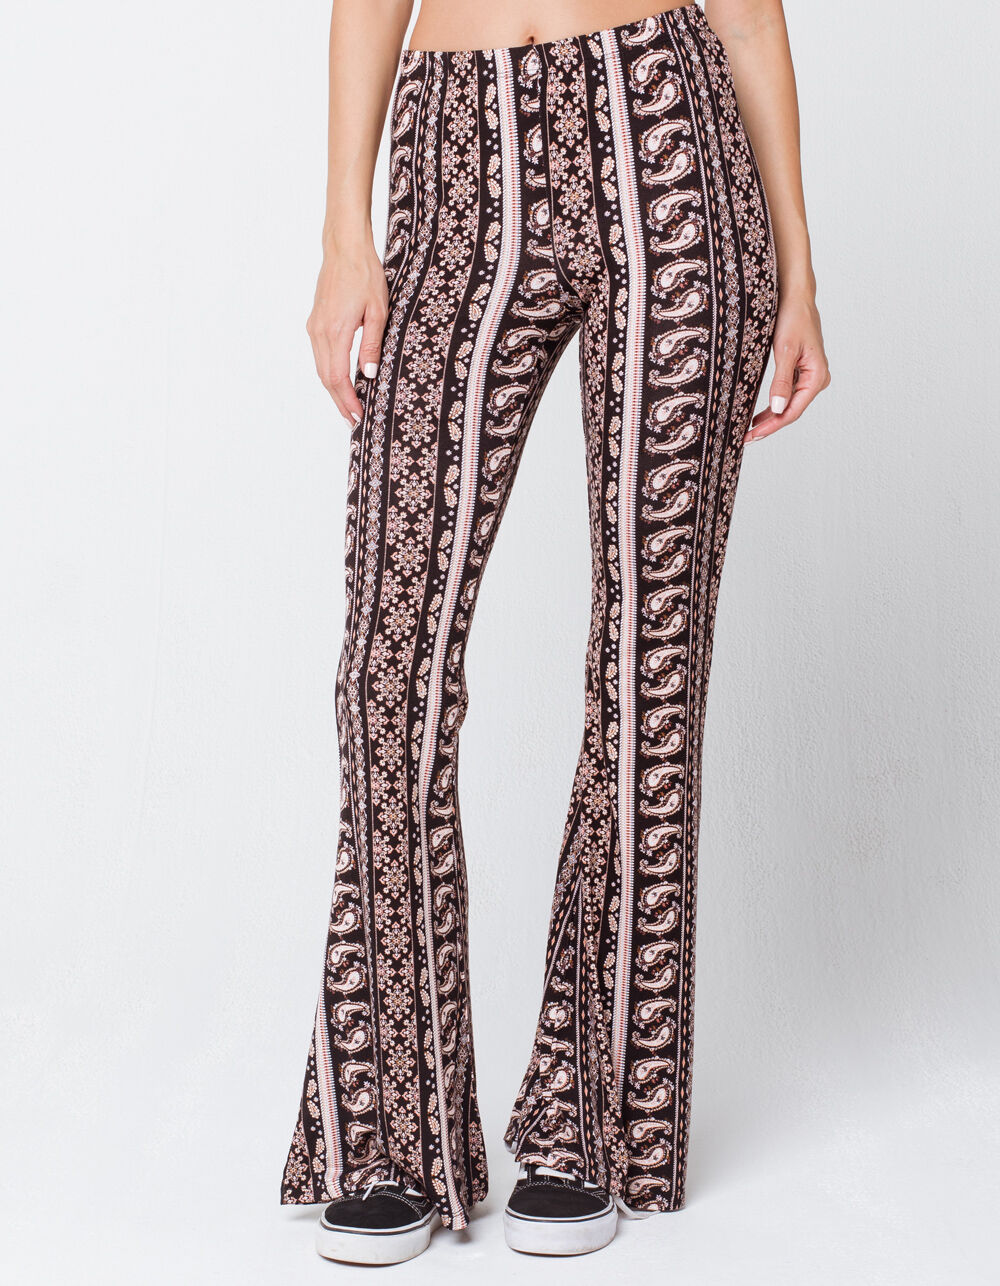 SKY AND SPARROW Paisley Womens Flare Pants - BLACK COMBO | Tillys